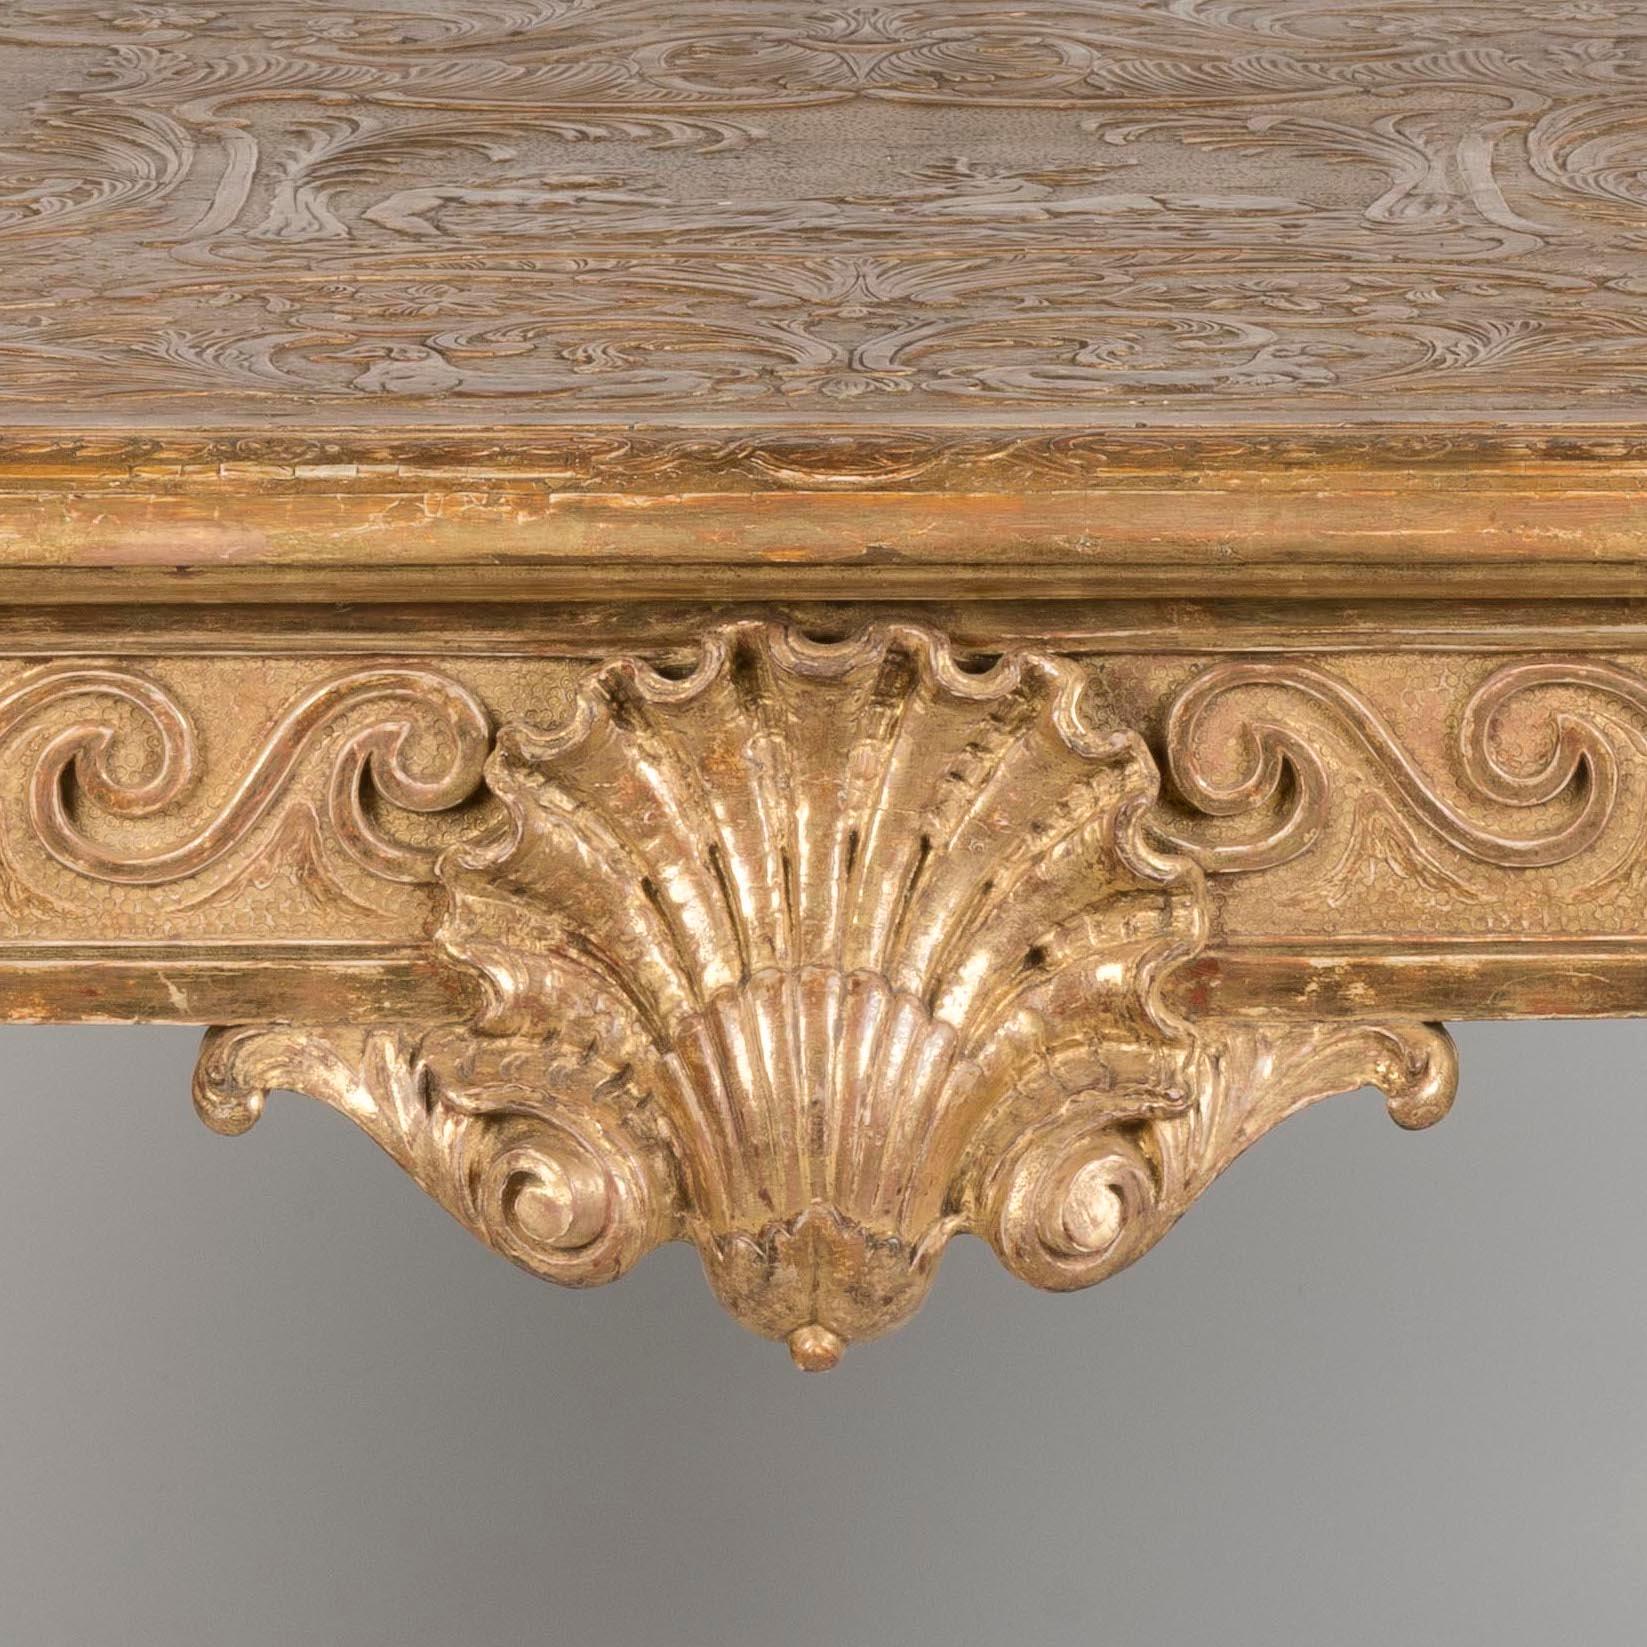 19th Century English Gilt Gesso Console Table in the Early Georgian Style For Sale 3